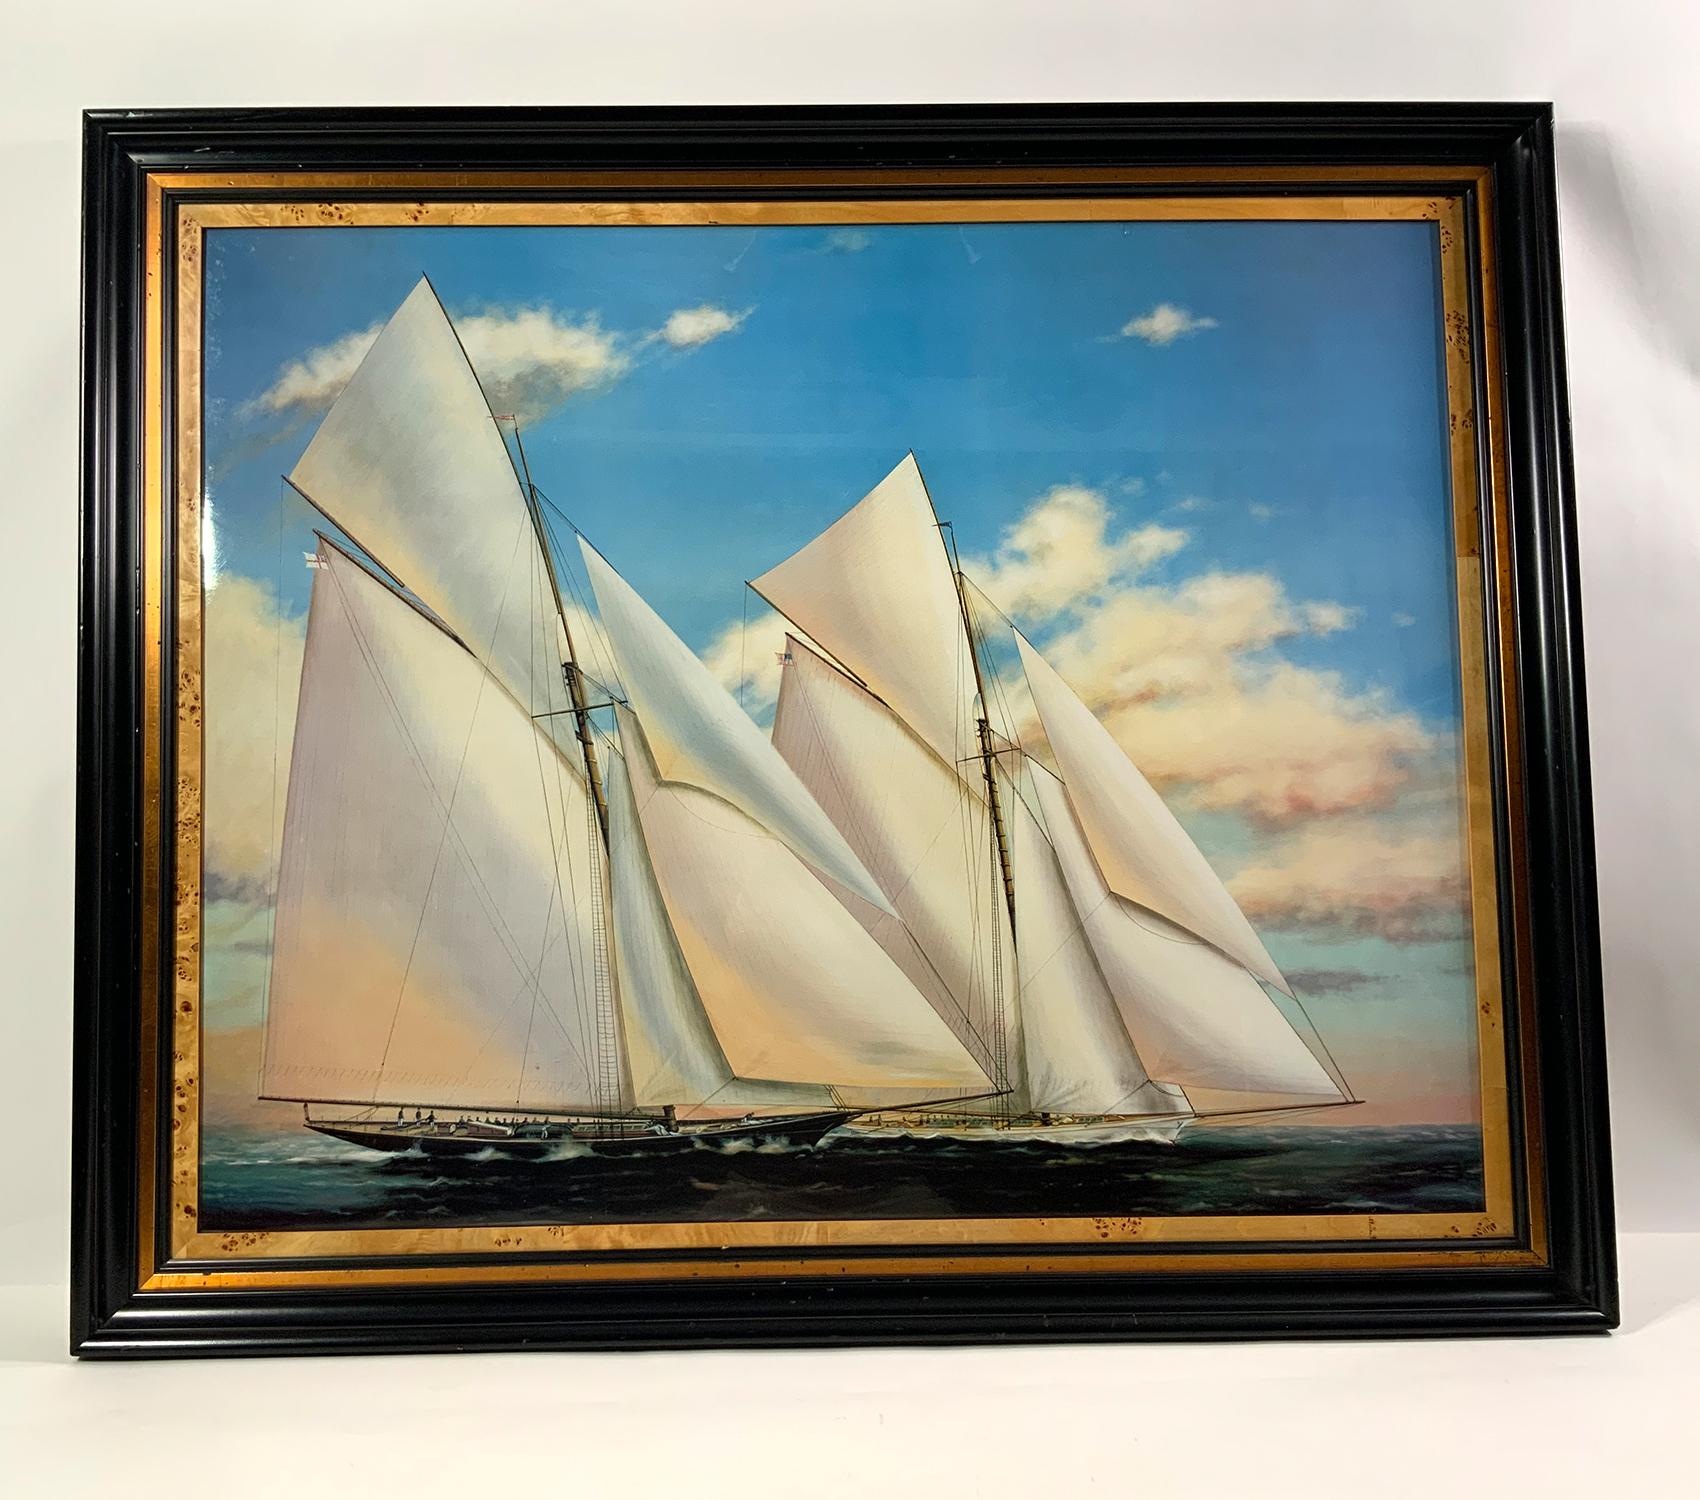 Colorful piece of maritime art showing two large gaff rigged yachts with flying club sails. Flying racing through calm seas. Professionally framed. Crisp detail. Some sort of high def image reproduction. Very vibrant. Large format.

Weight: 21